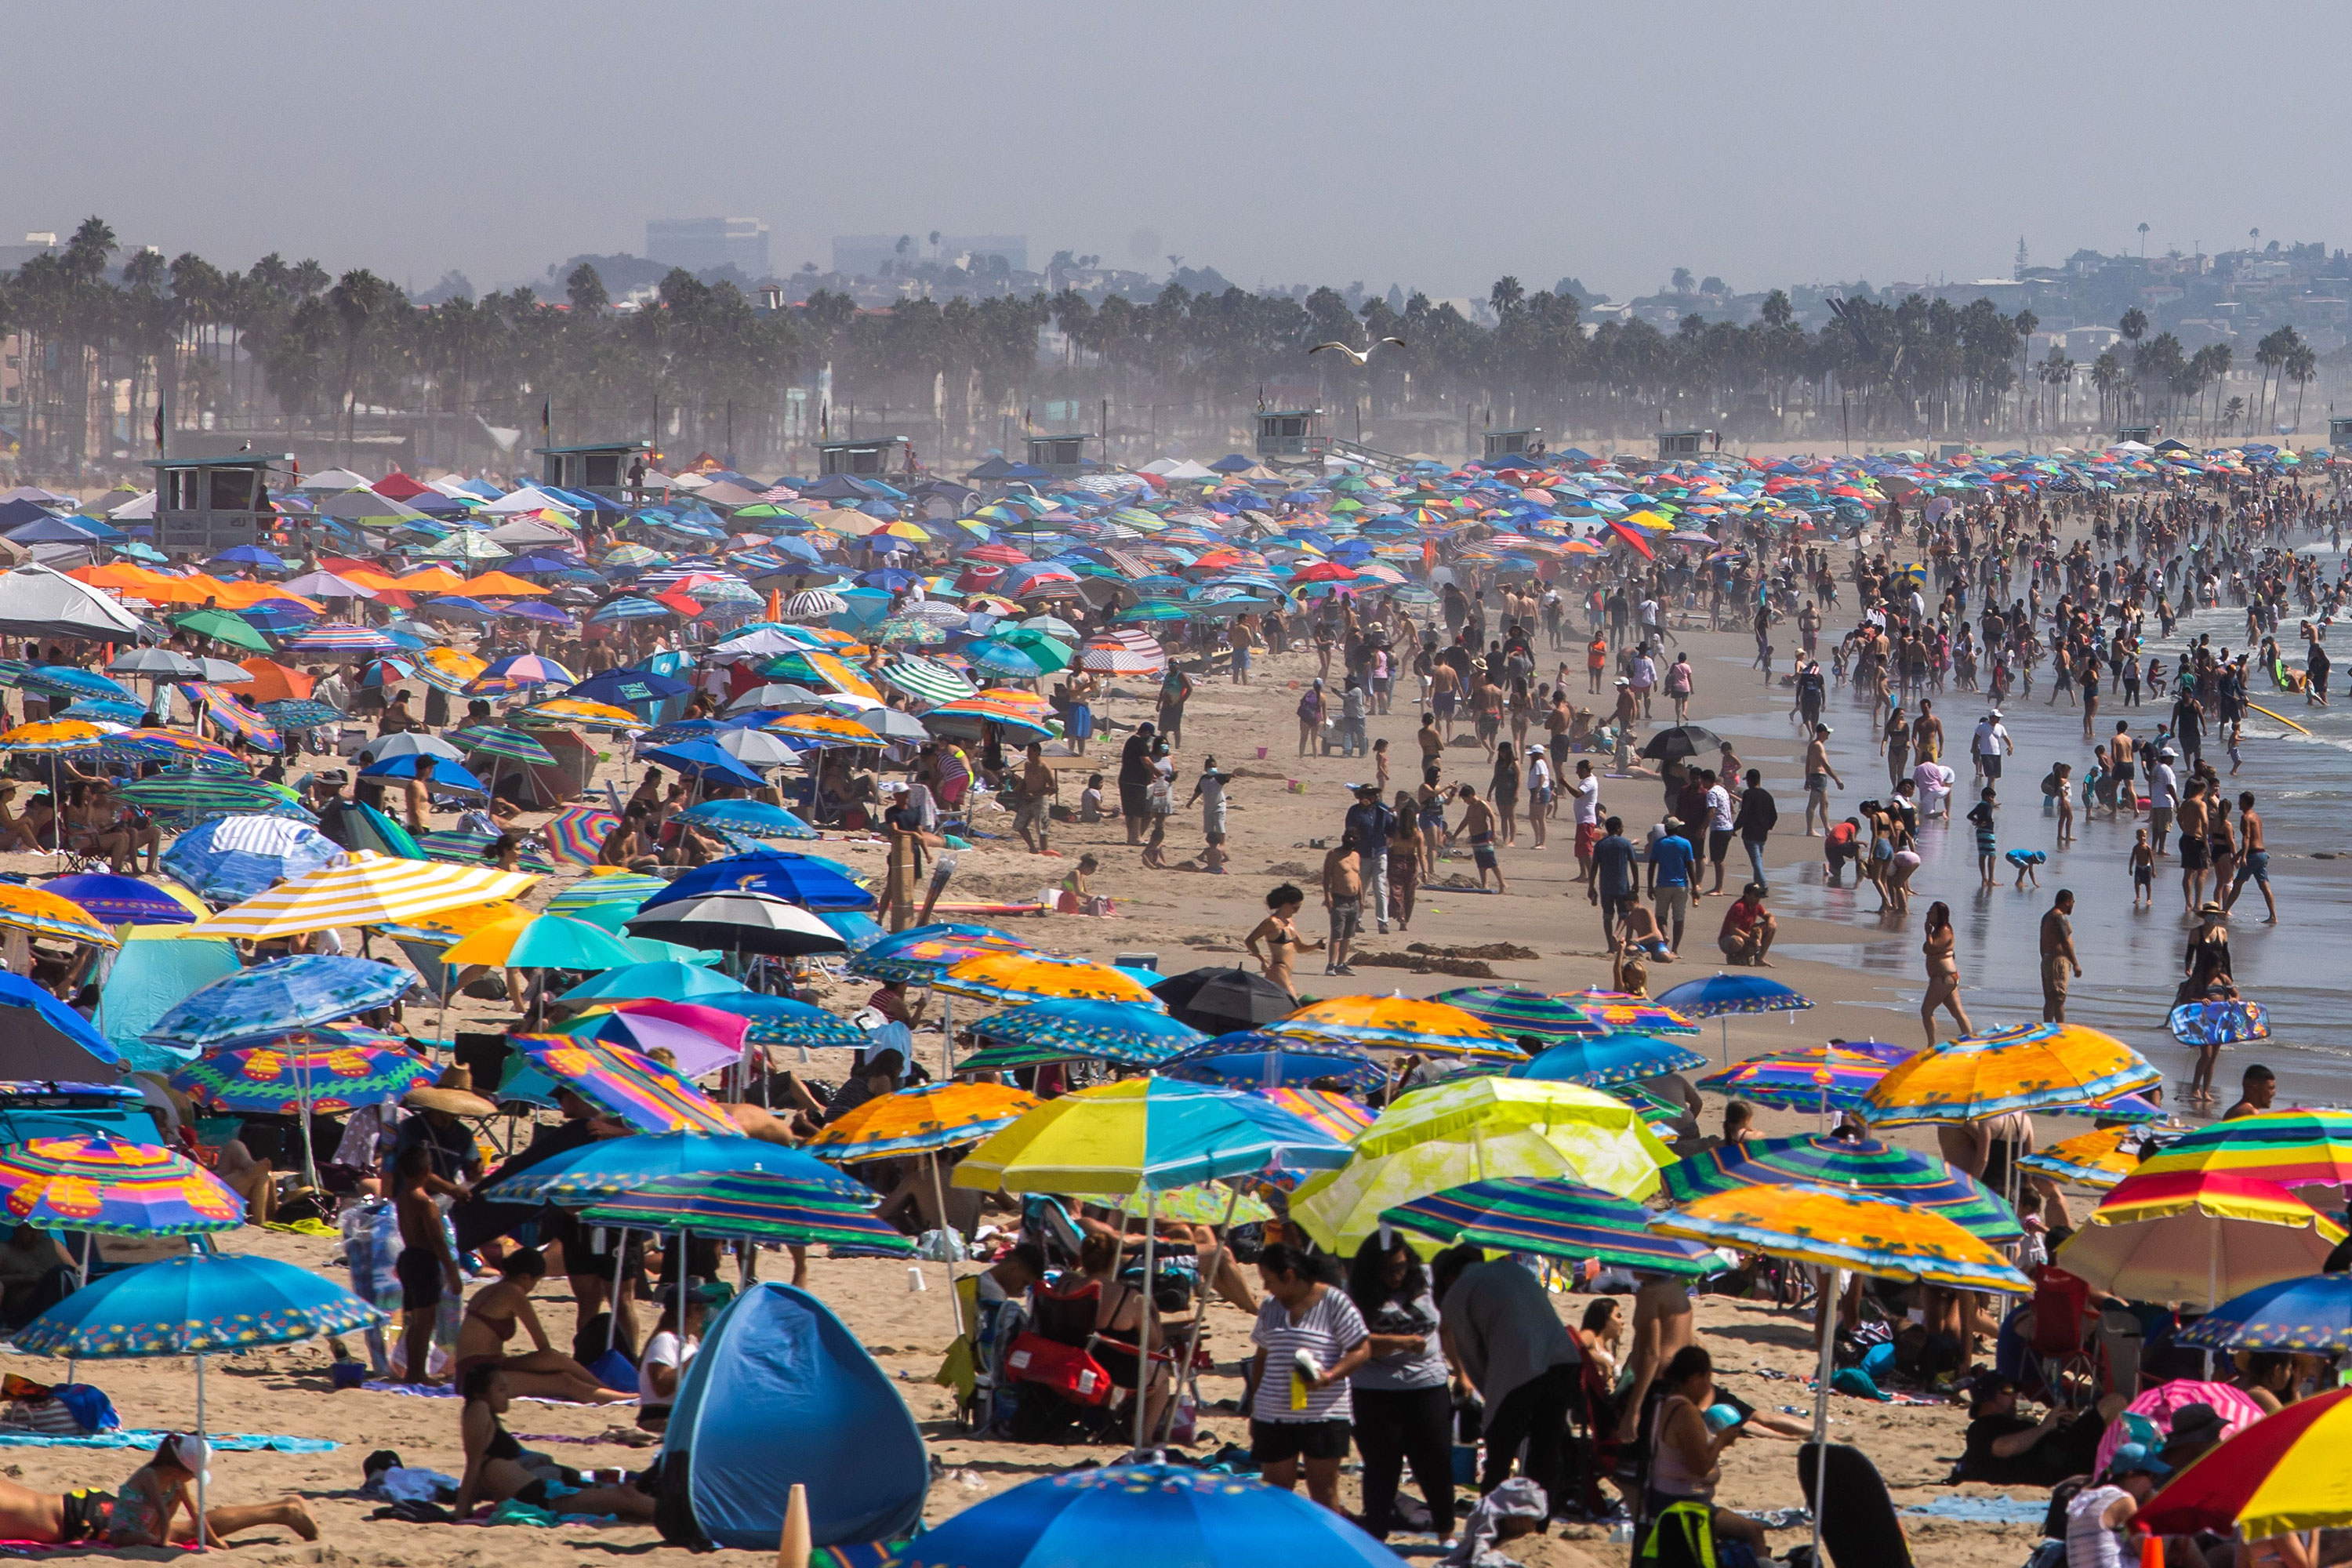 People gather on the beach on September 6 in Santa Monica, California.